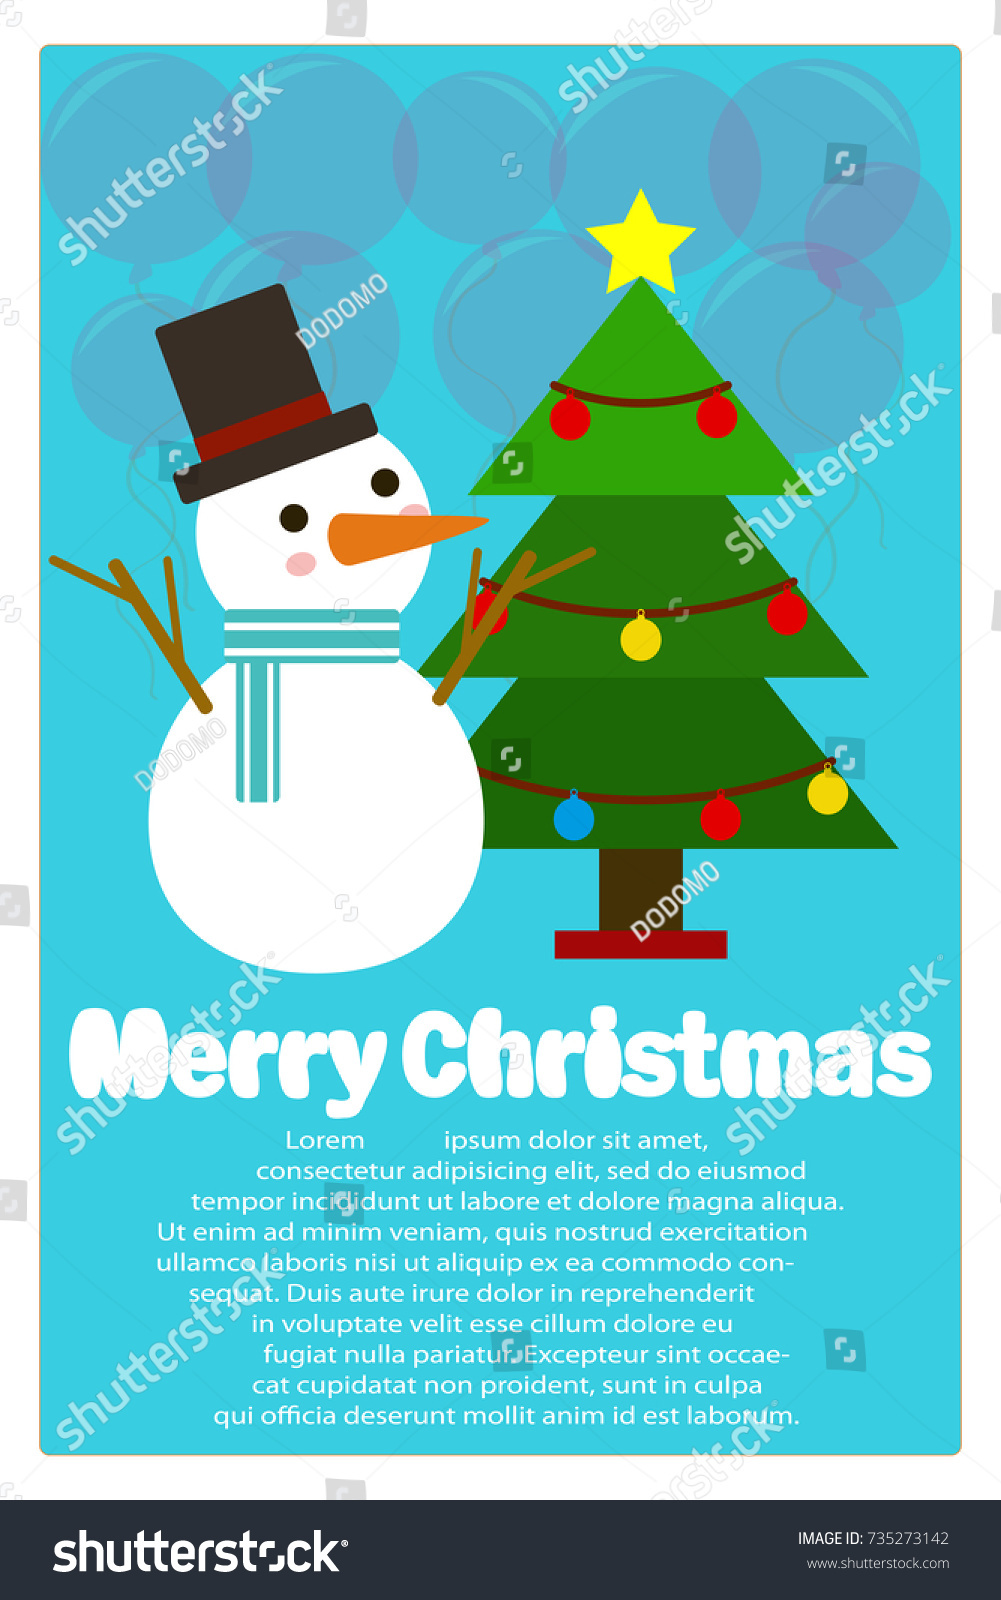 Merry Christmas and Happy New Year Illustration of Santa ing snowy winter Greeting